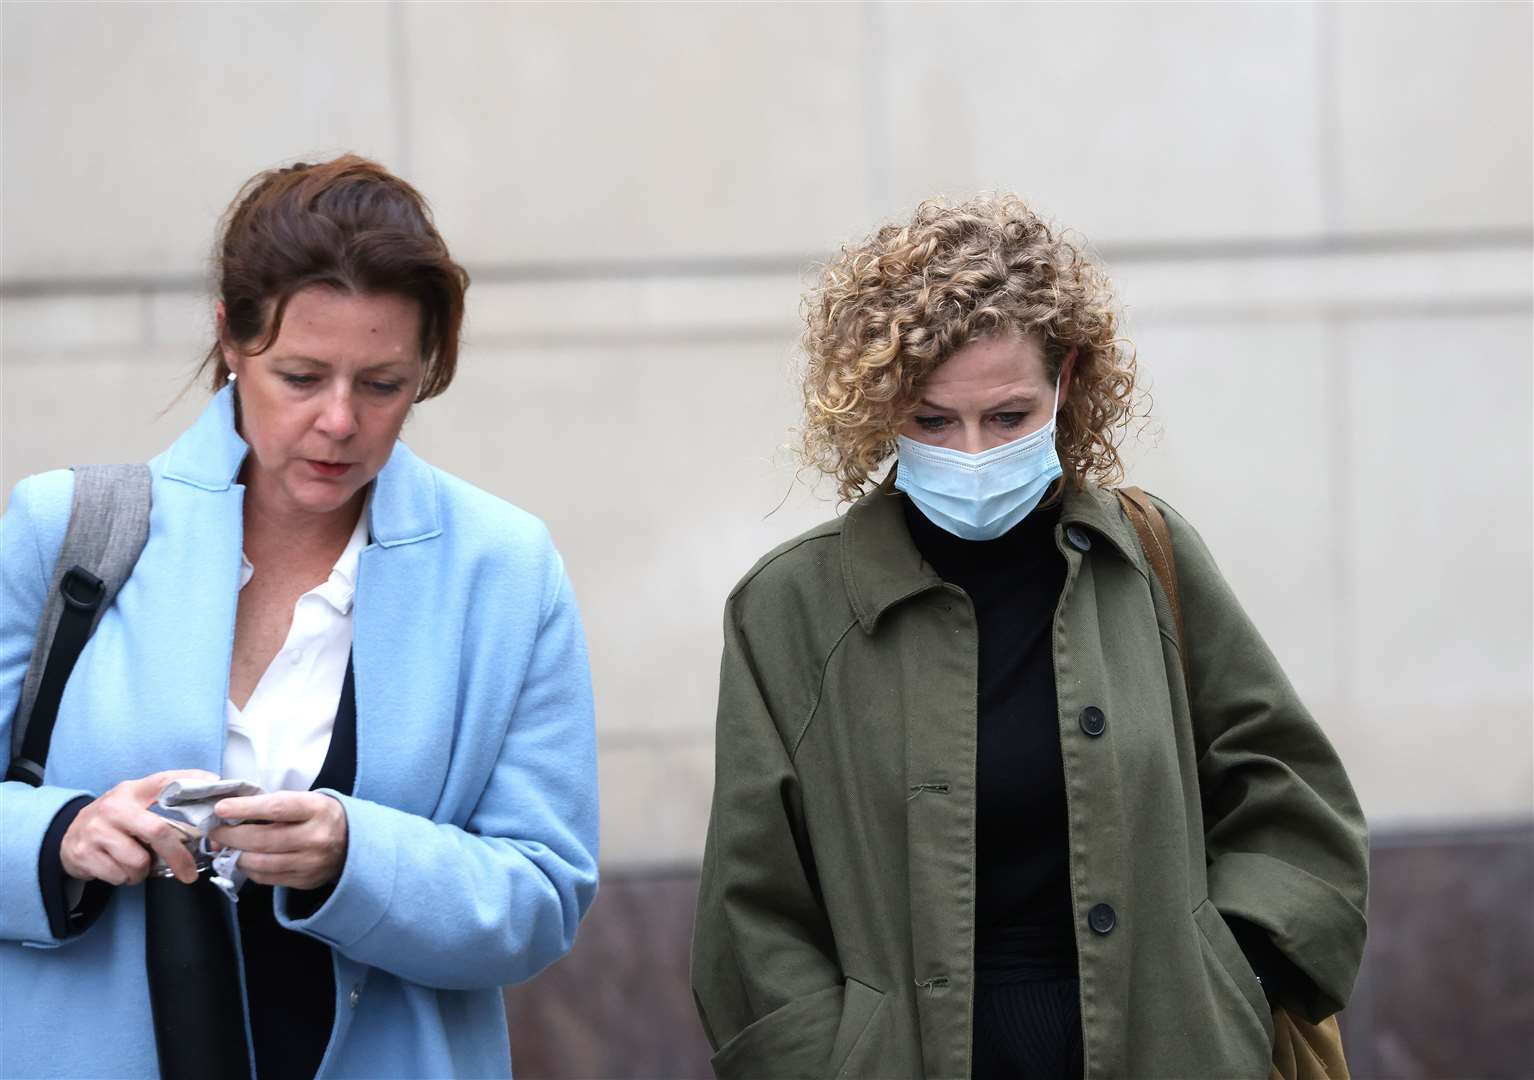 Fiona Donohoe (right) leaves Laganside Courts in Belfast with barrister Brenda Campbell QC after a hearing last year (PA)